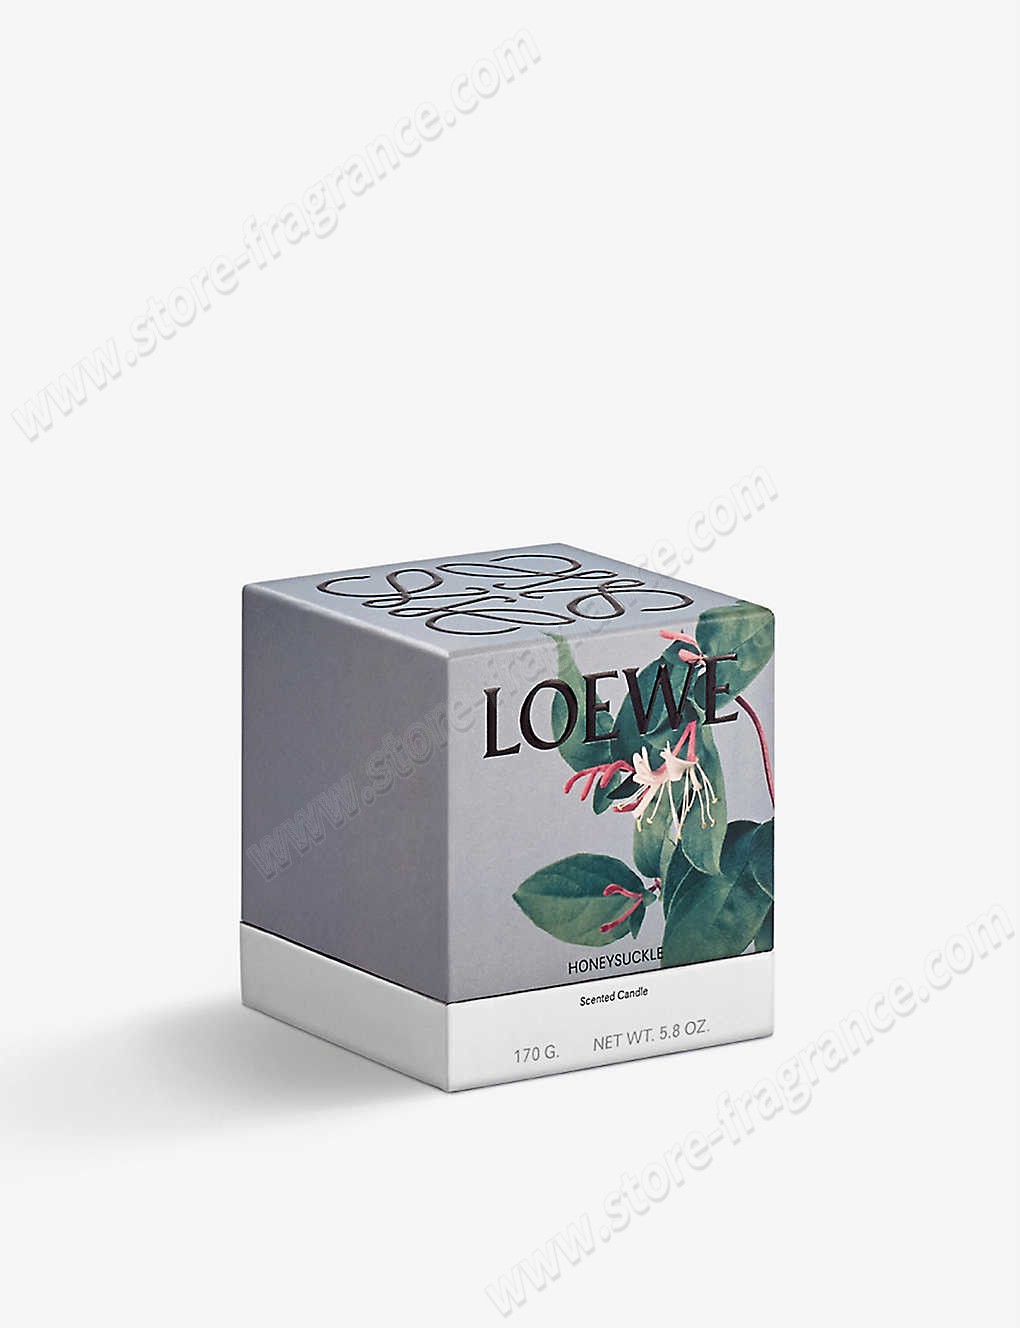 LOEWE/Honeysuckle scented candle 170g ✿ Discount Store - -1